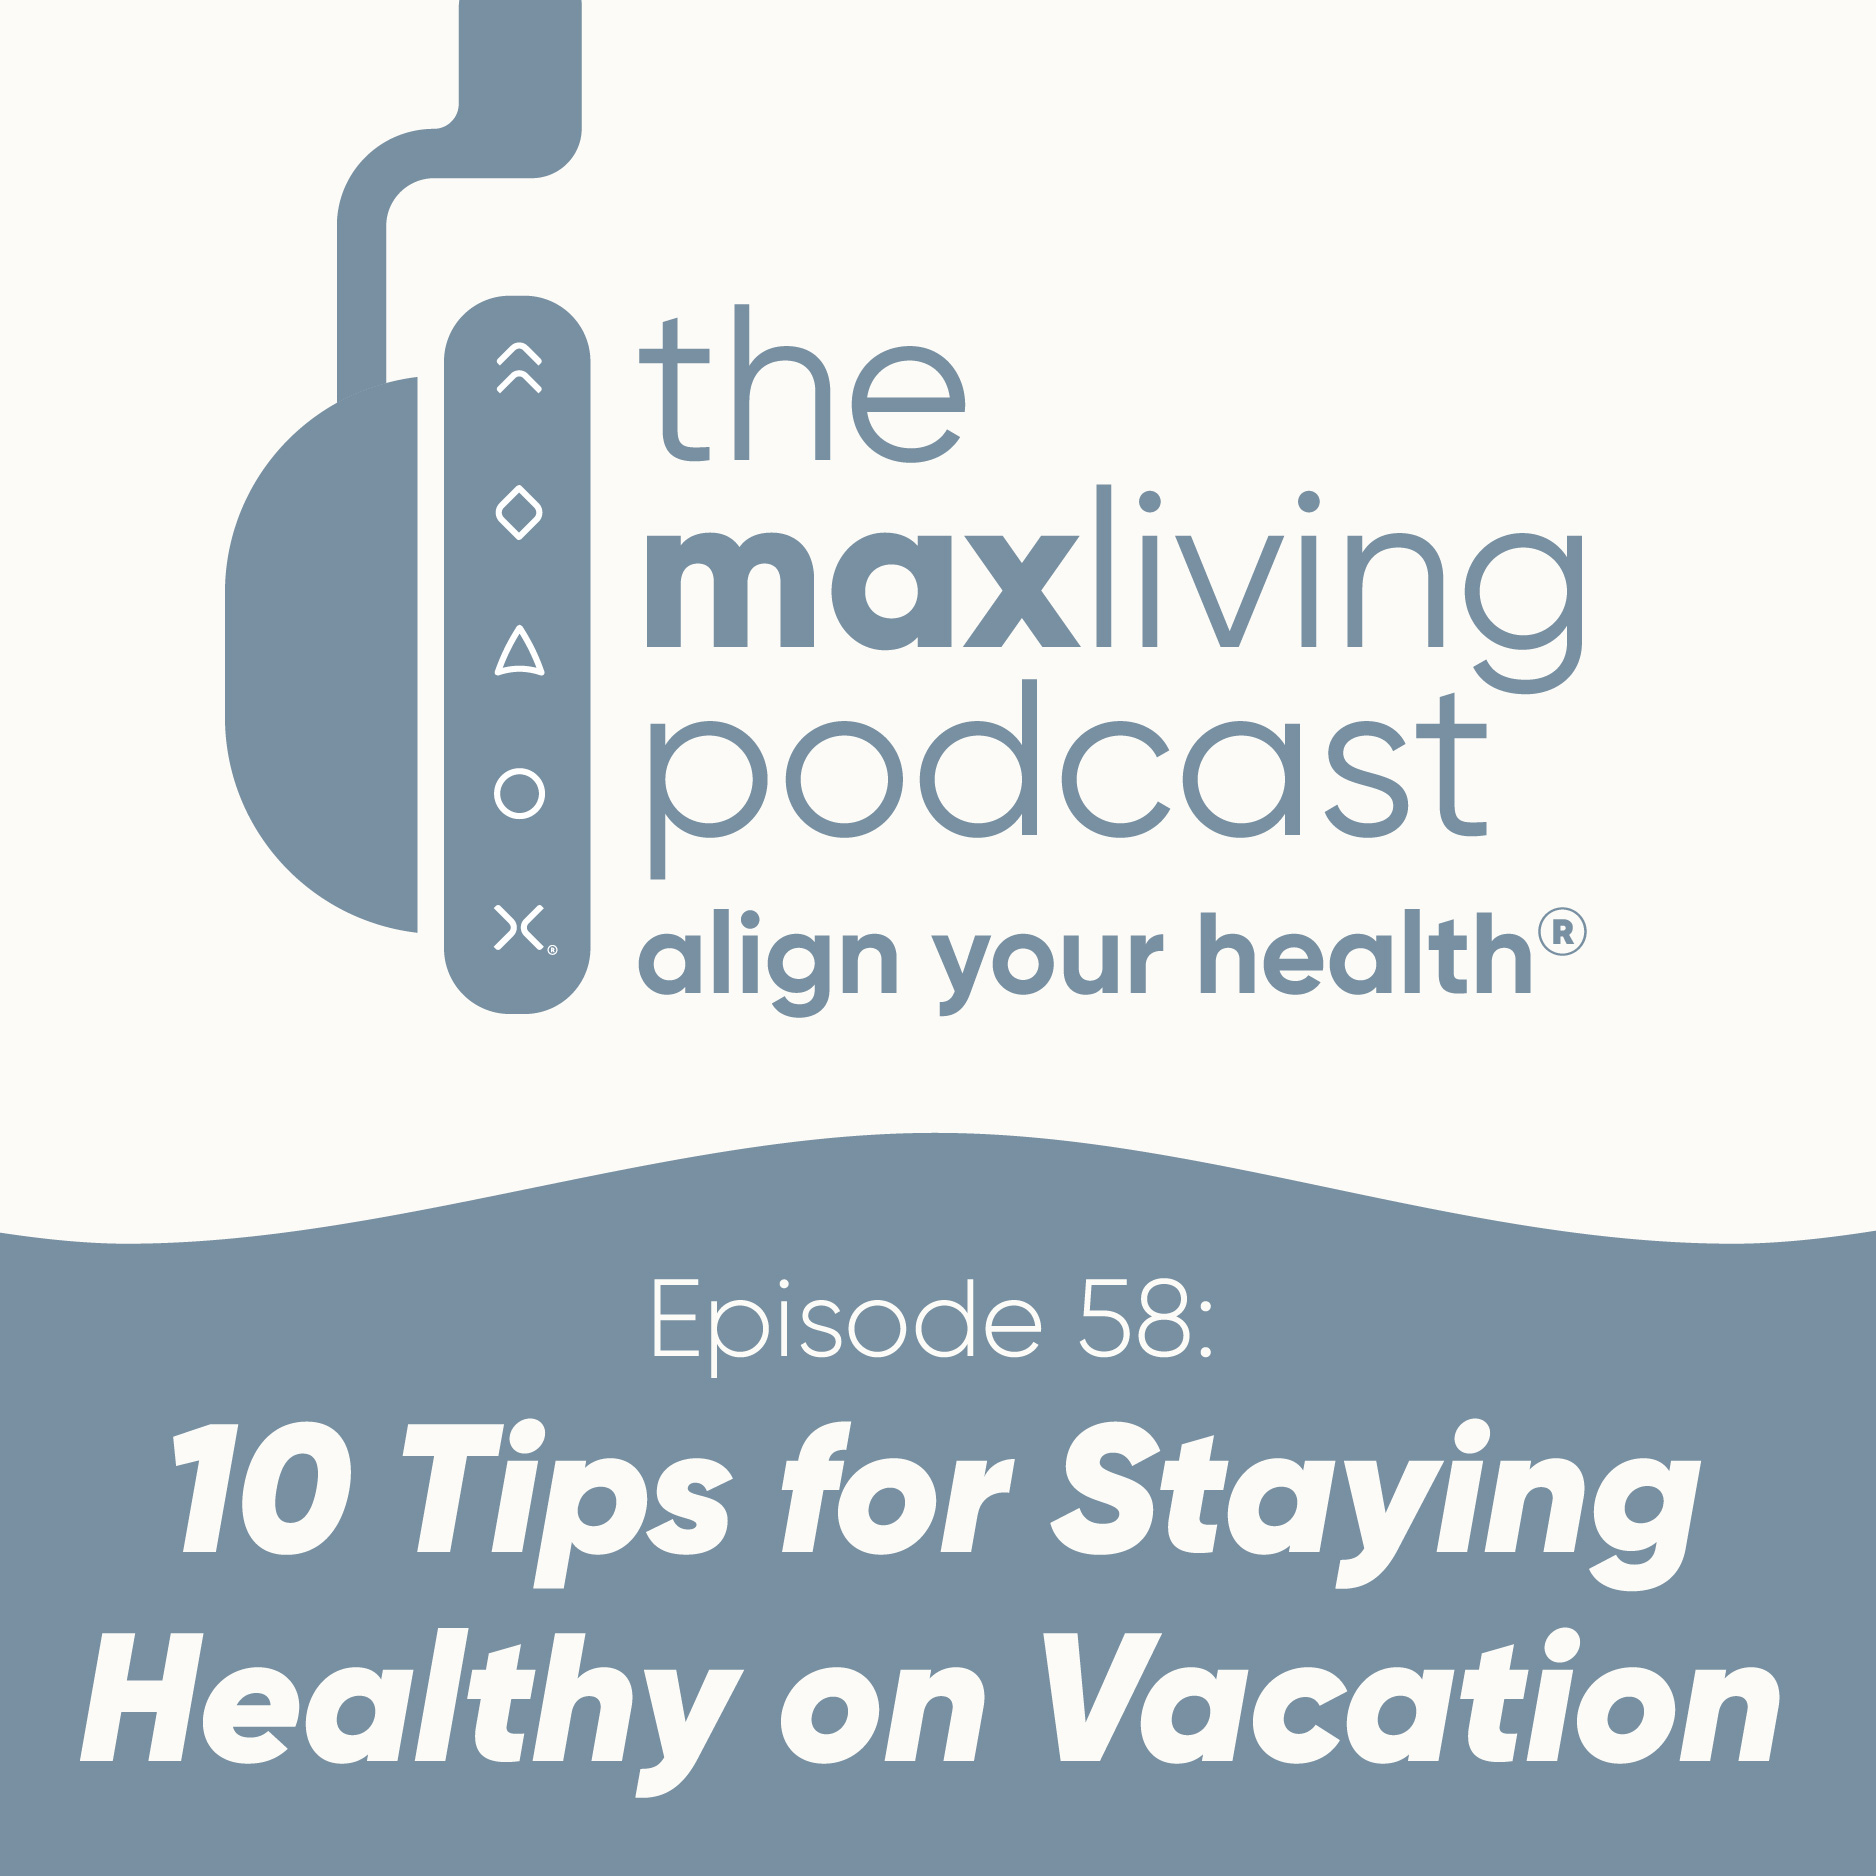 10 Tips for Staying Healthy on Vacation